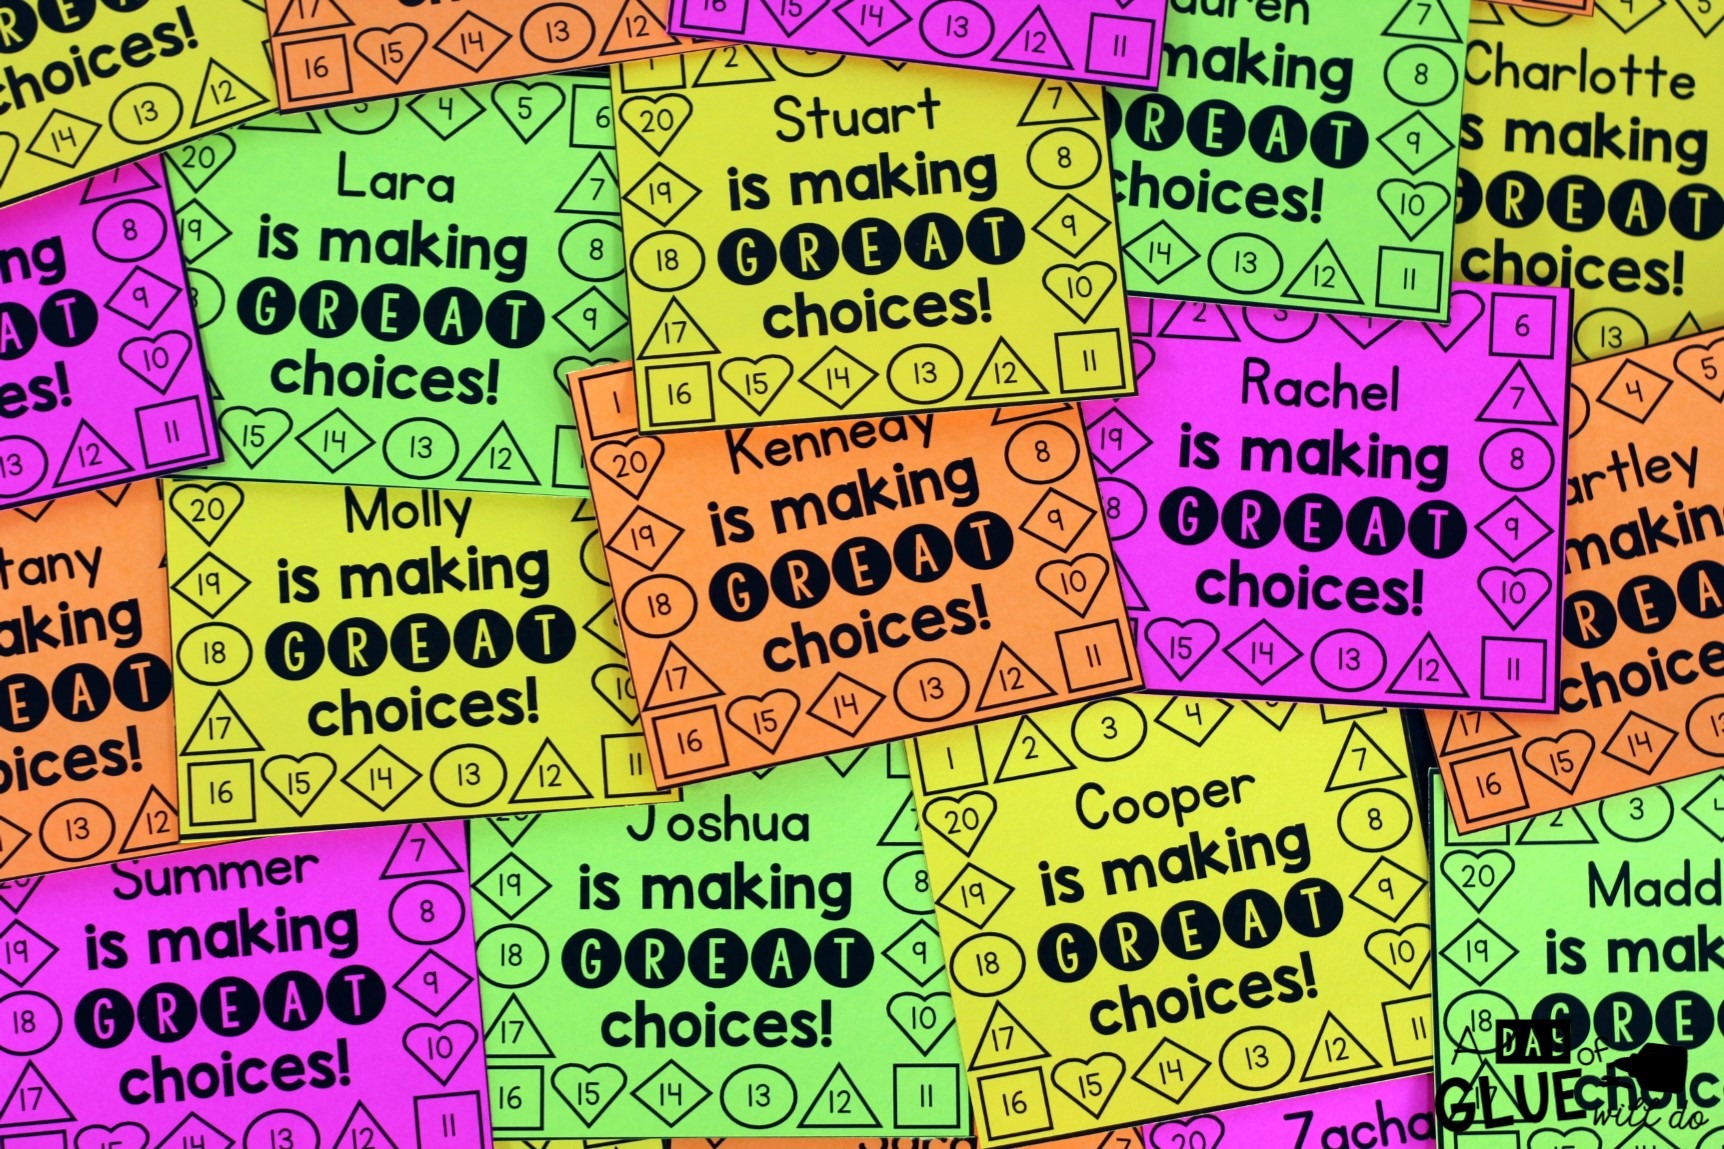 Are you looking for a fun, hands-on way to encourage your students to consistently make good choices? So was I and then I started implementing these behavior punch cards and suddenly my students were working VERY hard to earn their daily punch.